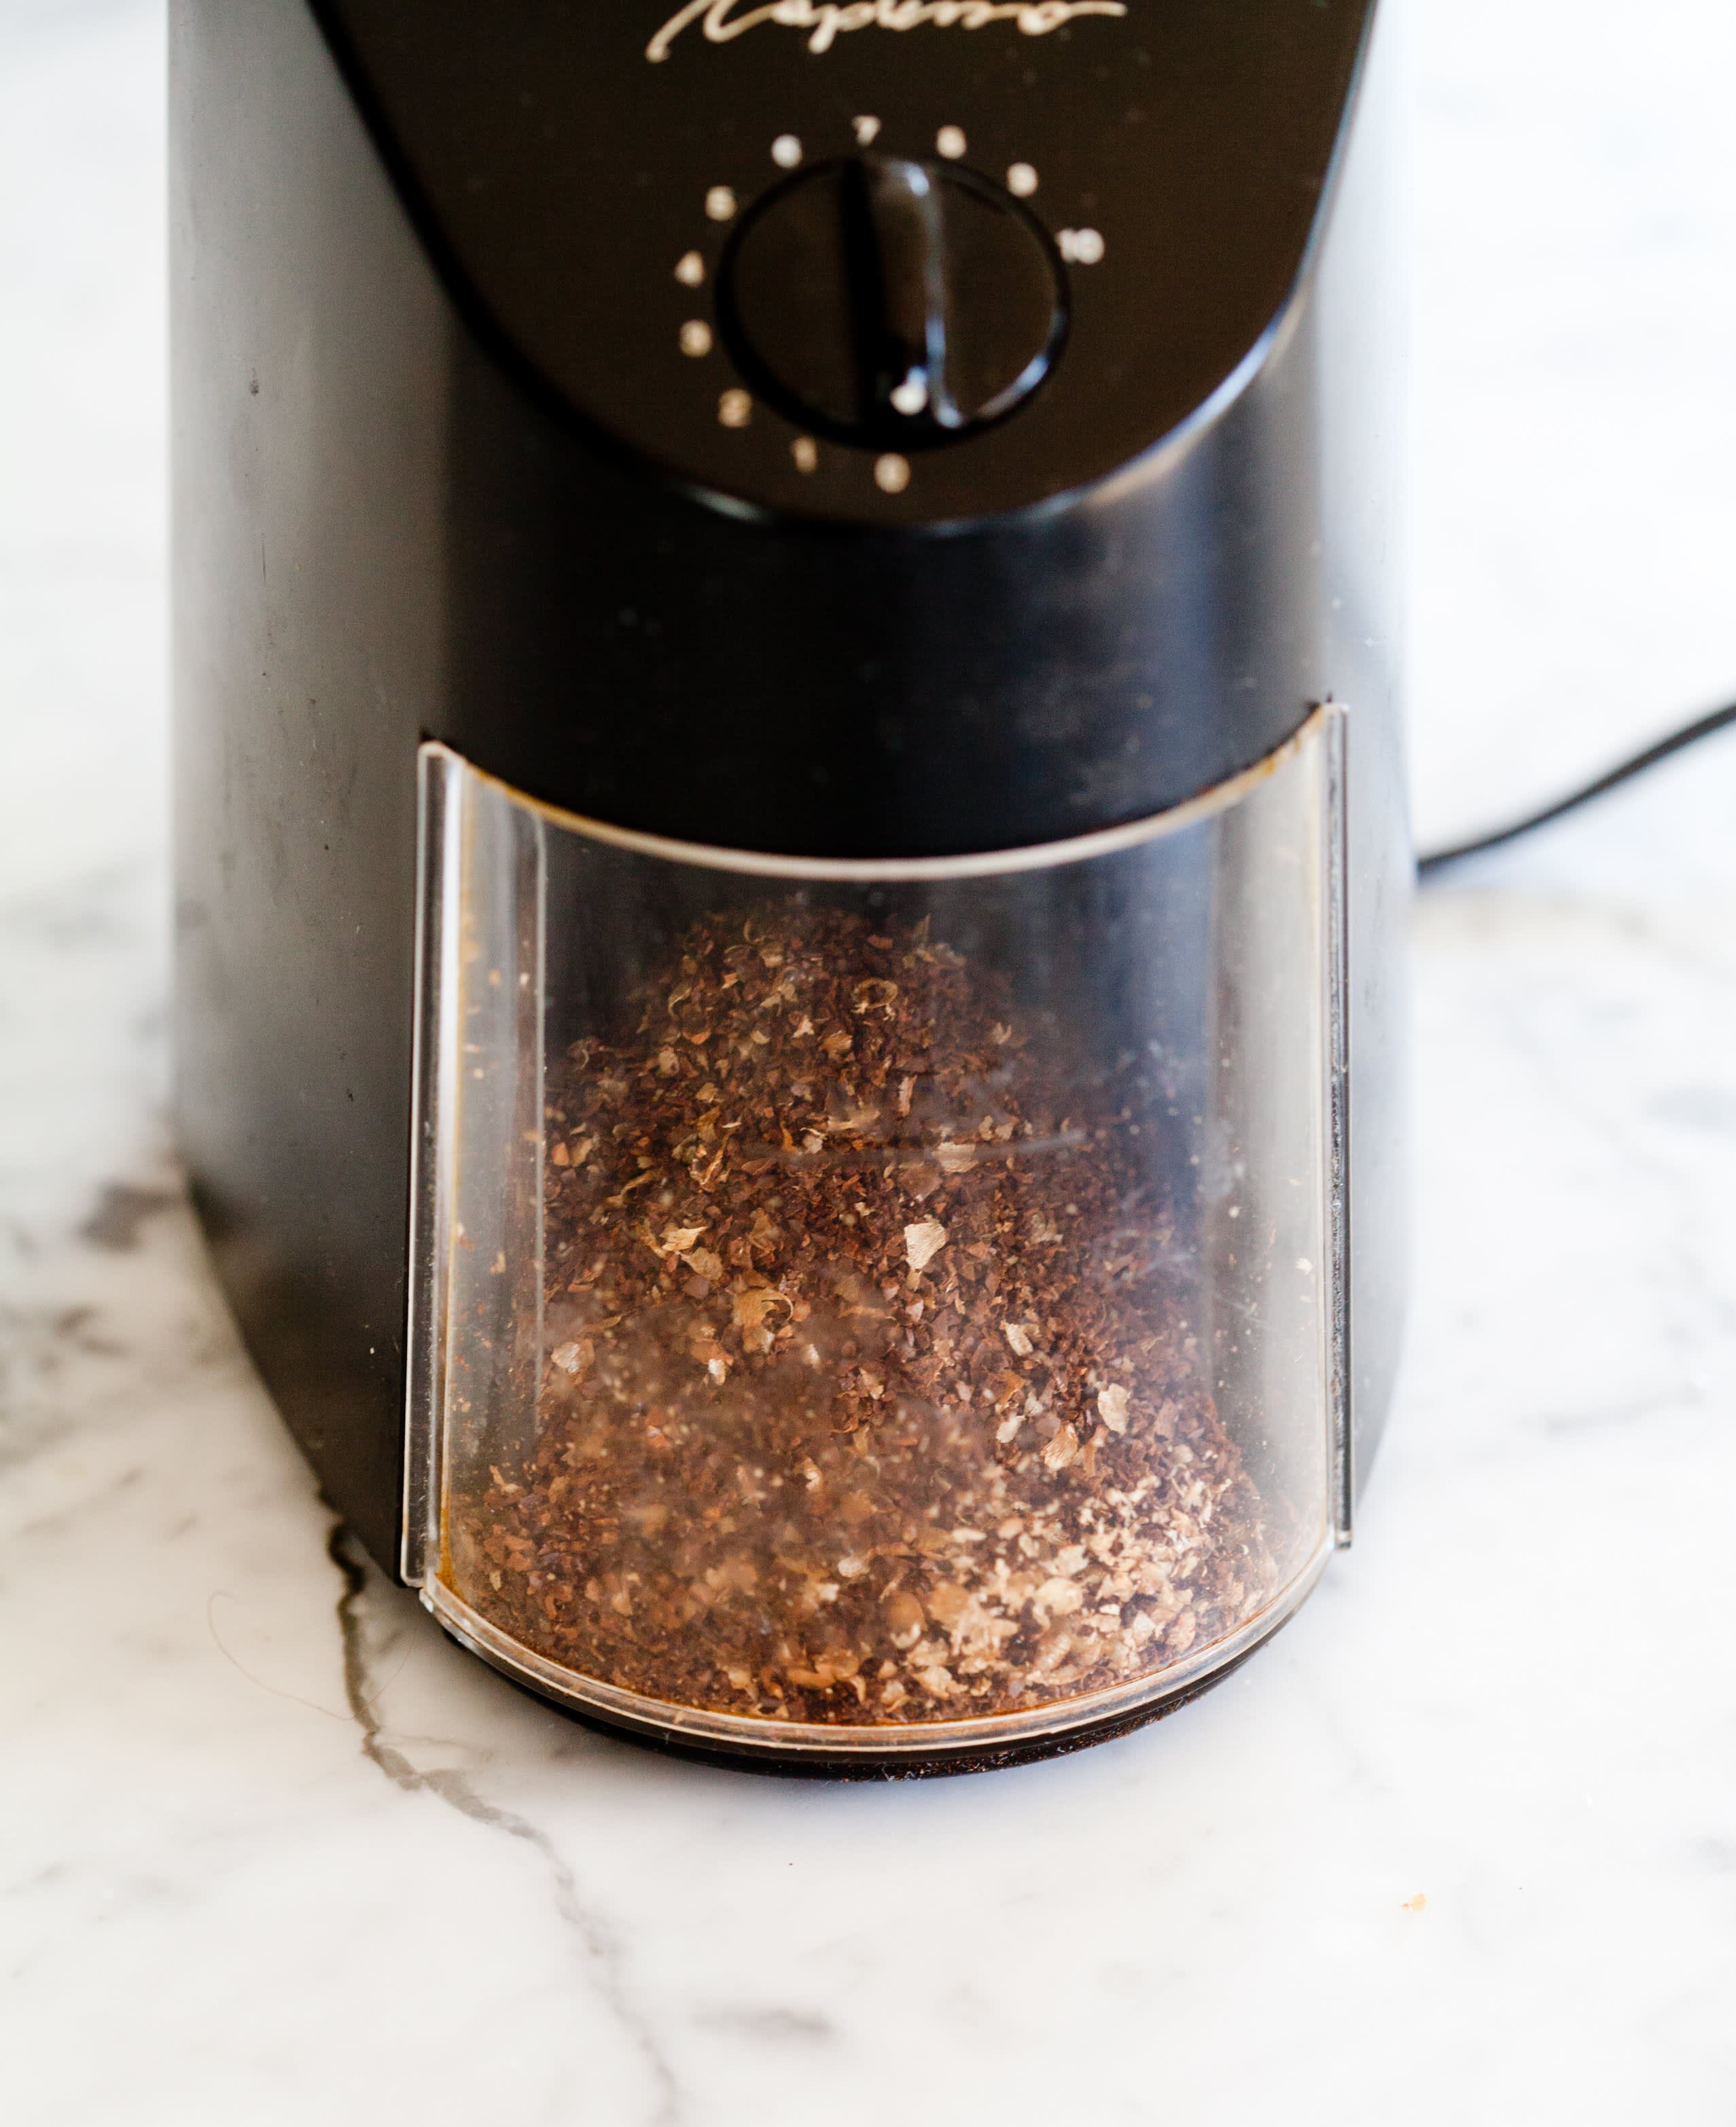 How To Make French Press Coffee | Kitchn